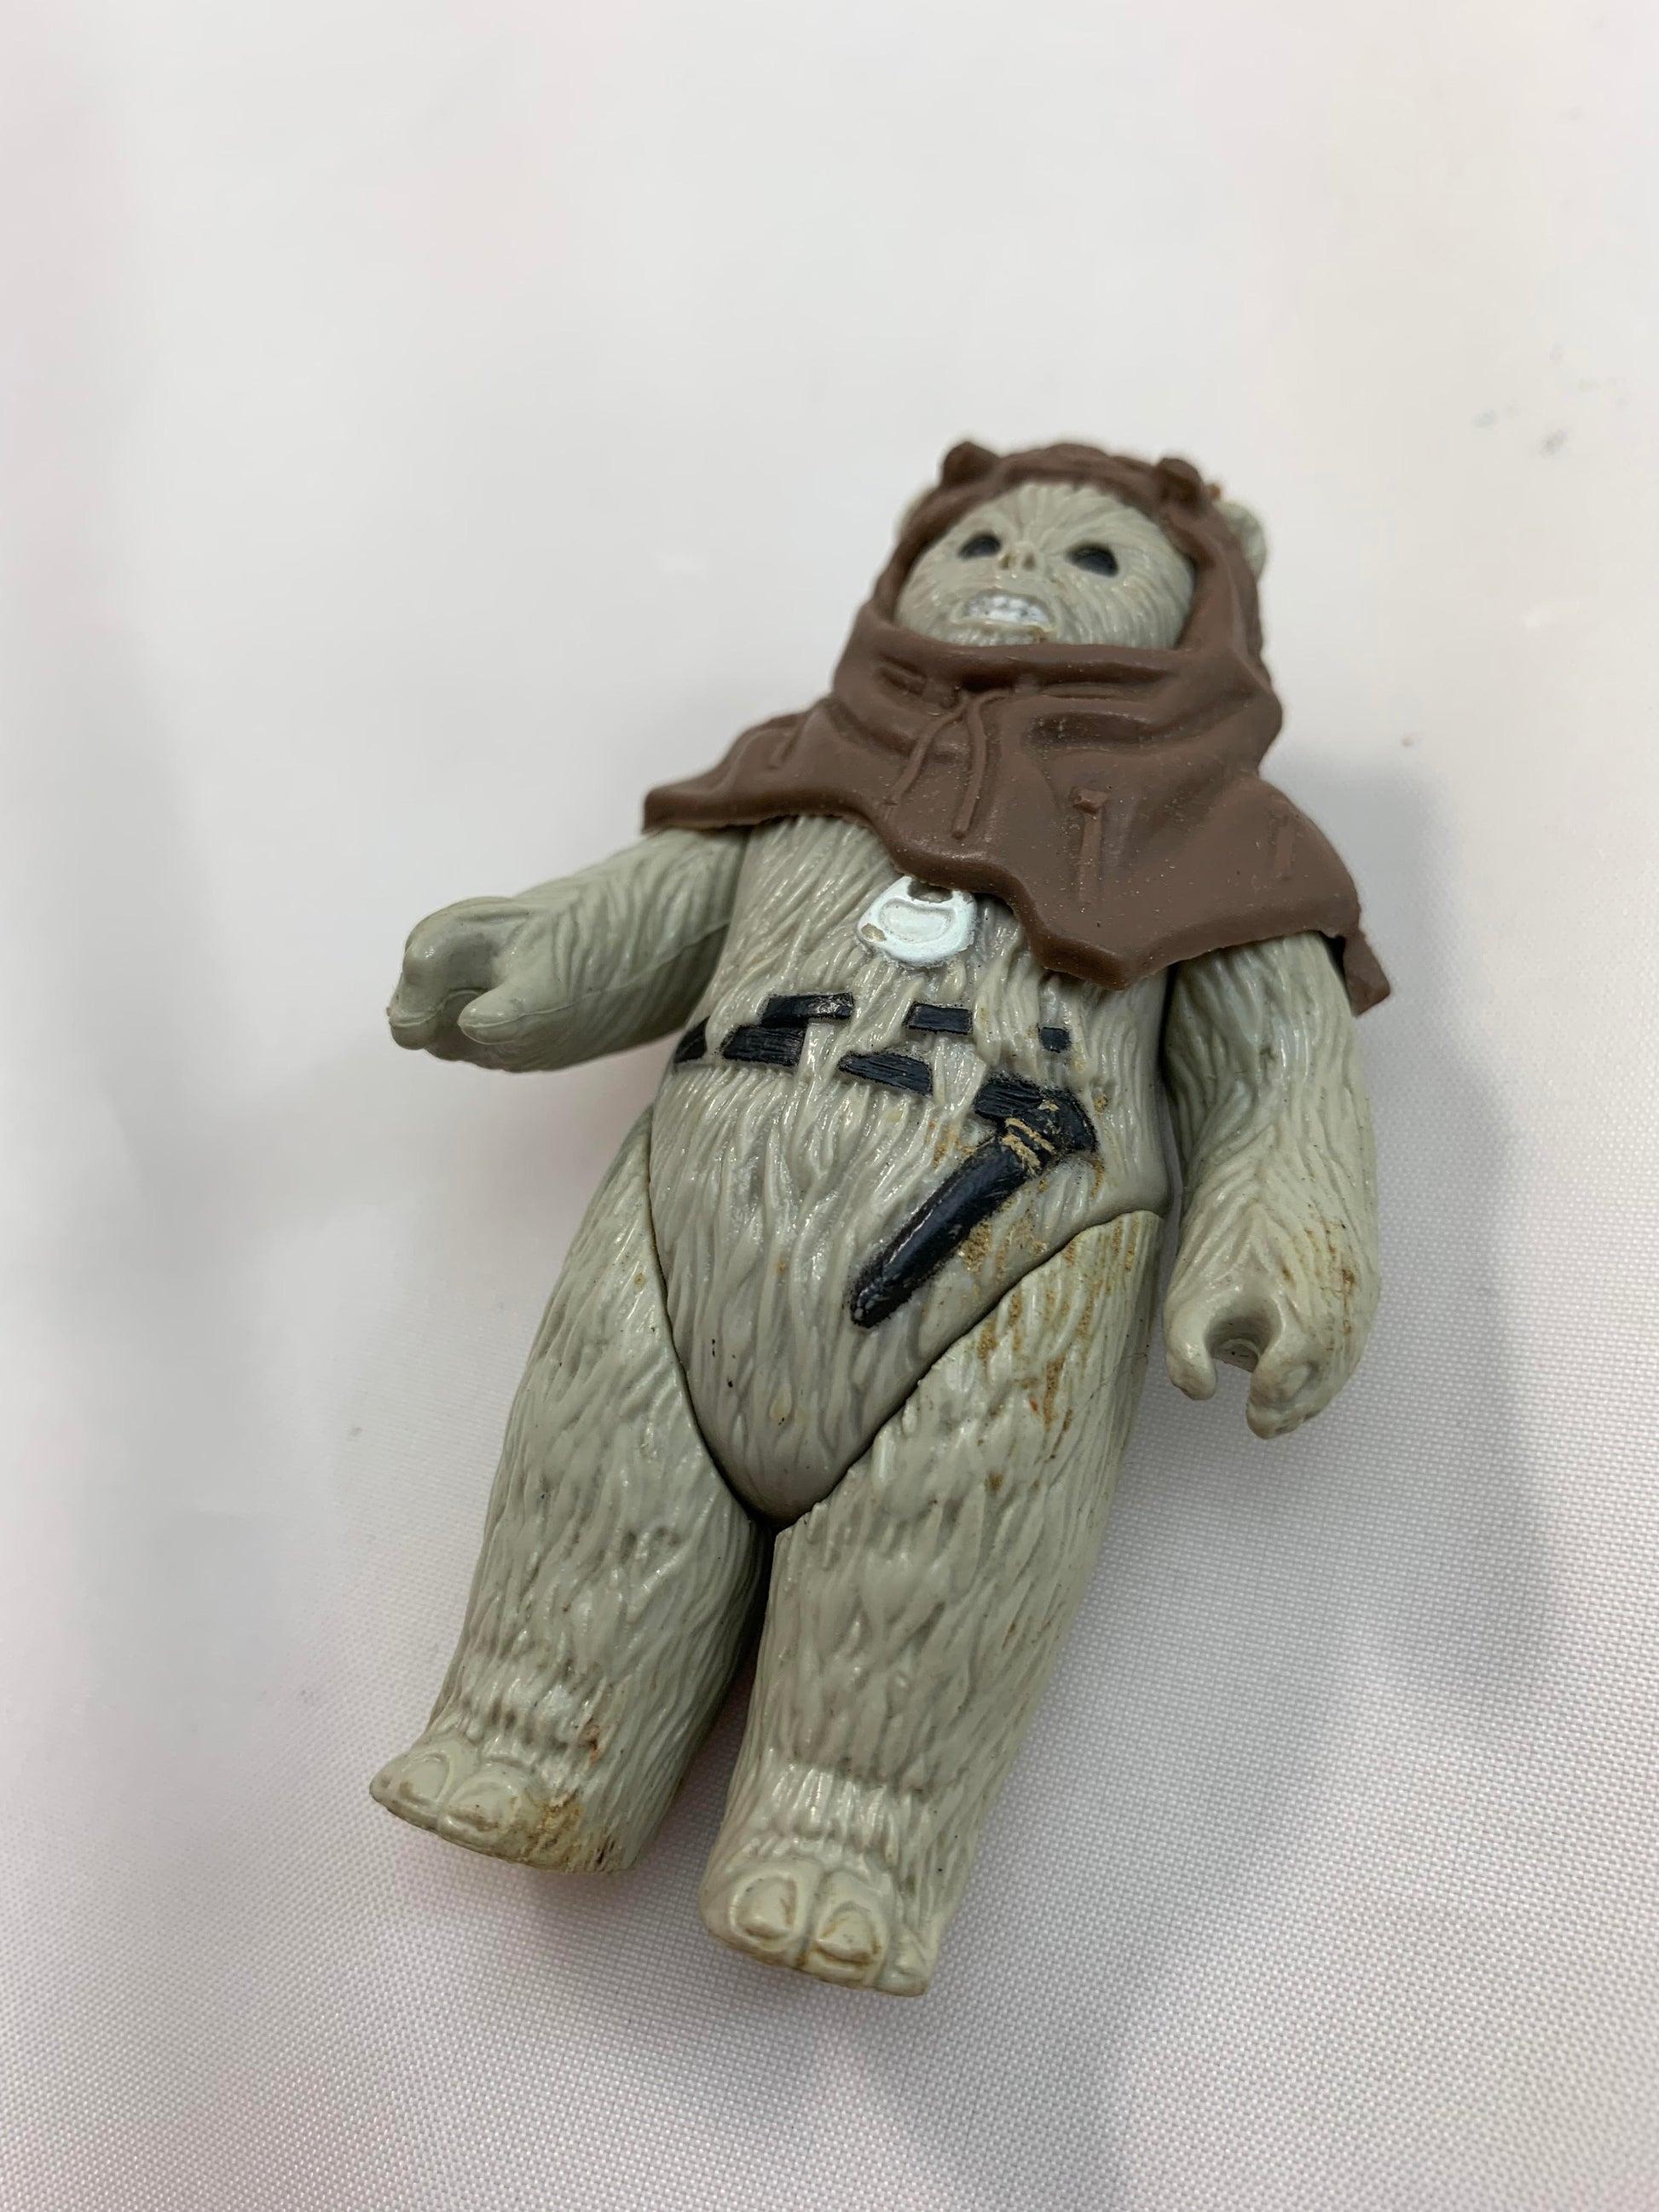 Kenner Vintage Star Wars ROTJ Chief Chirpa Ewok Action Figure 100% Original and complete with accessories and weapons COO LFL 83 H.K. - Loose